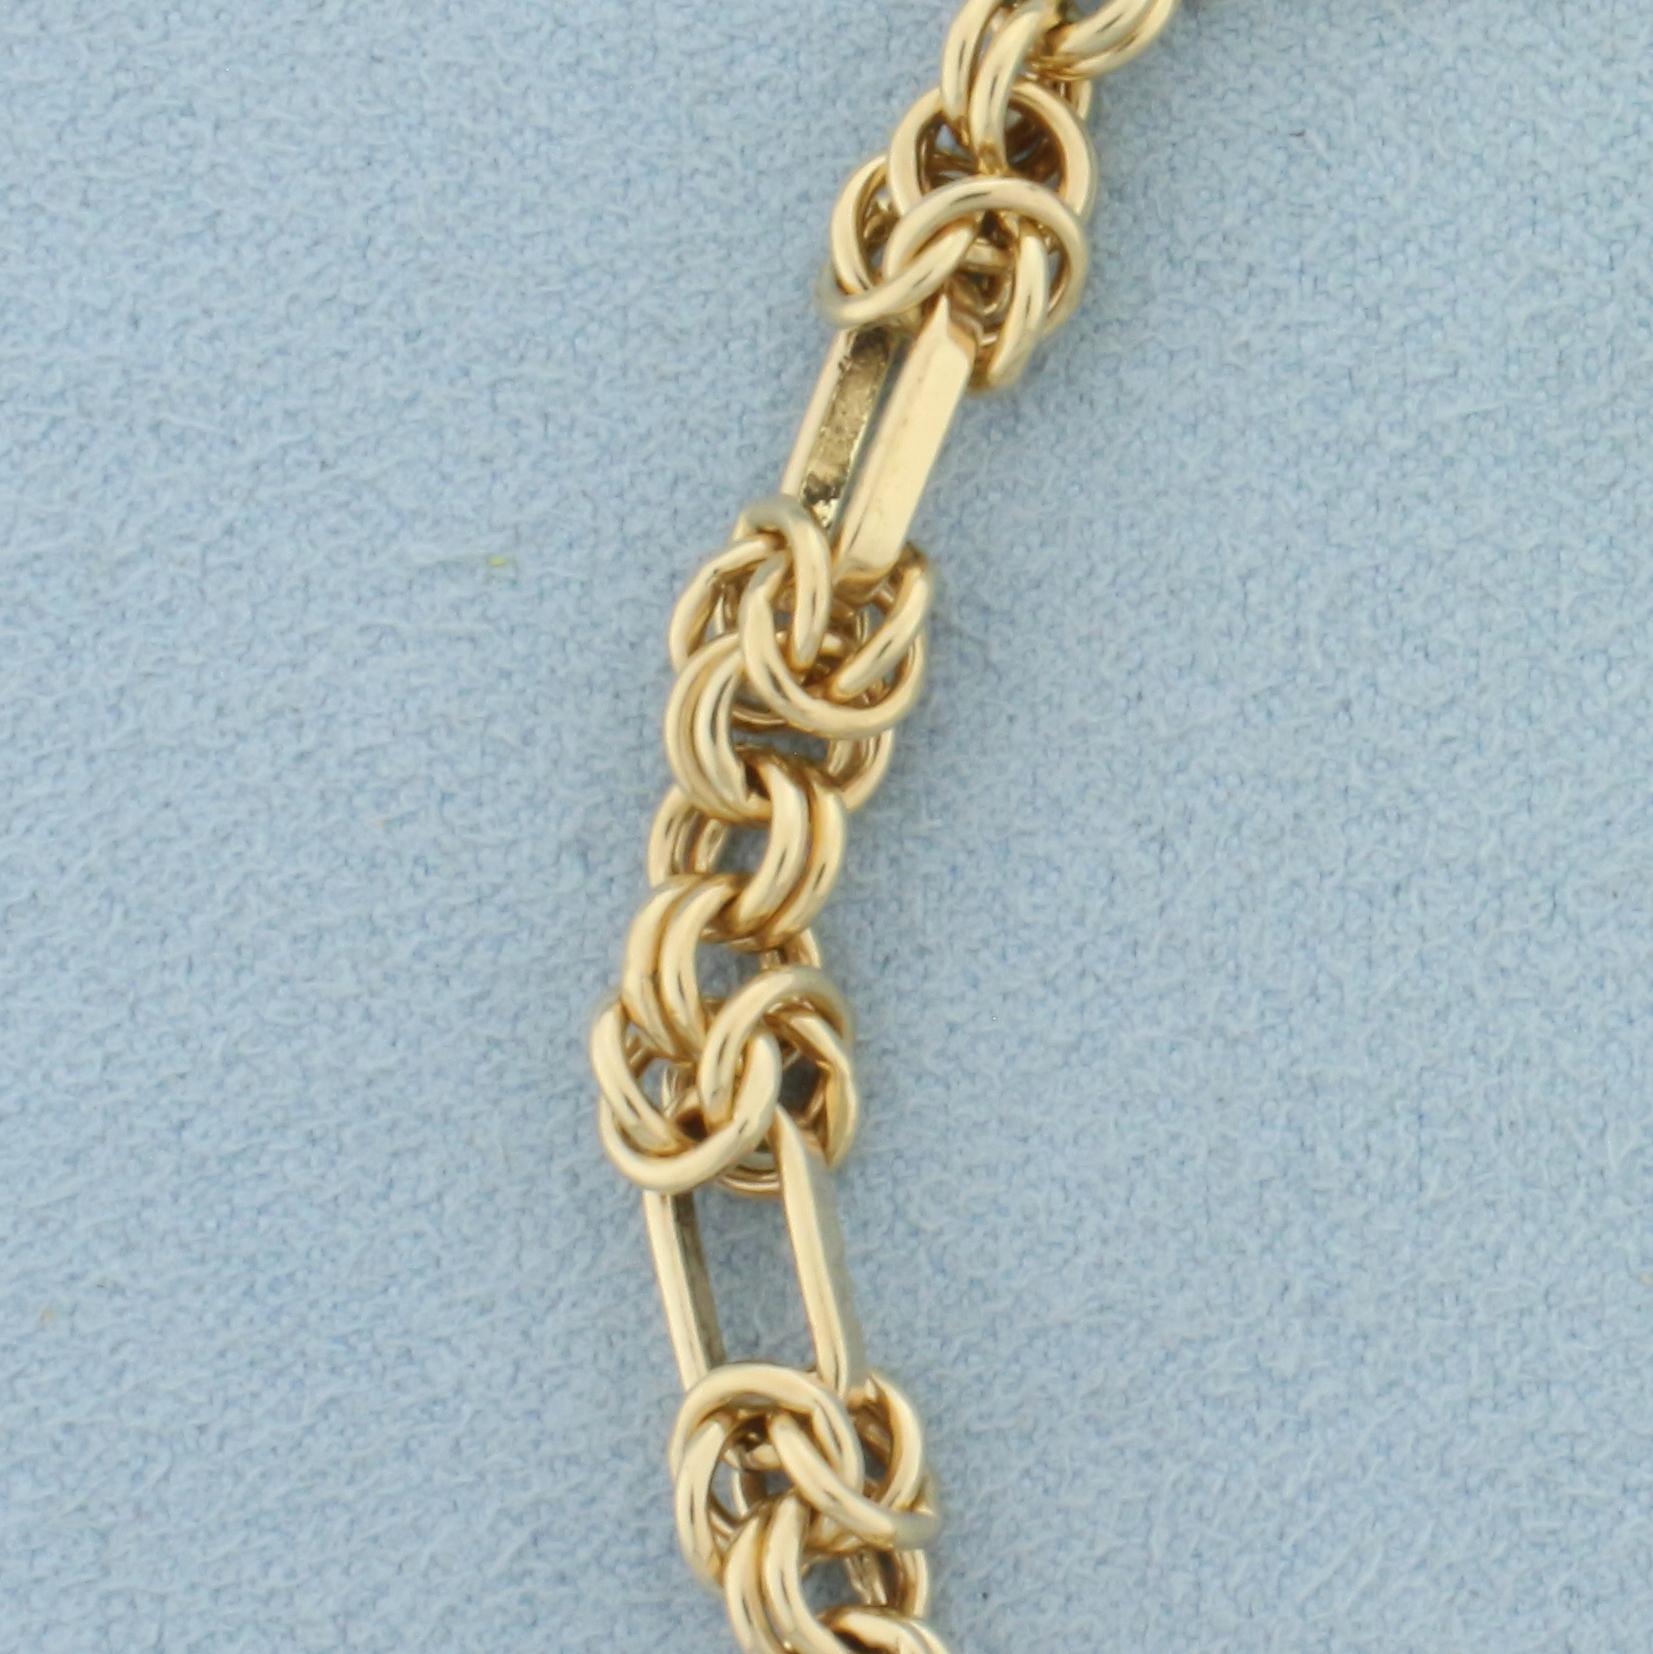 Italian Designer Knot And Oval Link Chain Bracelet In 14k Yellow Gold